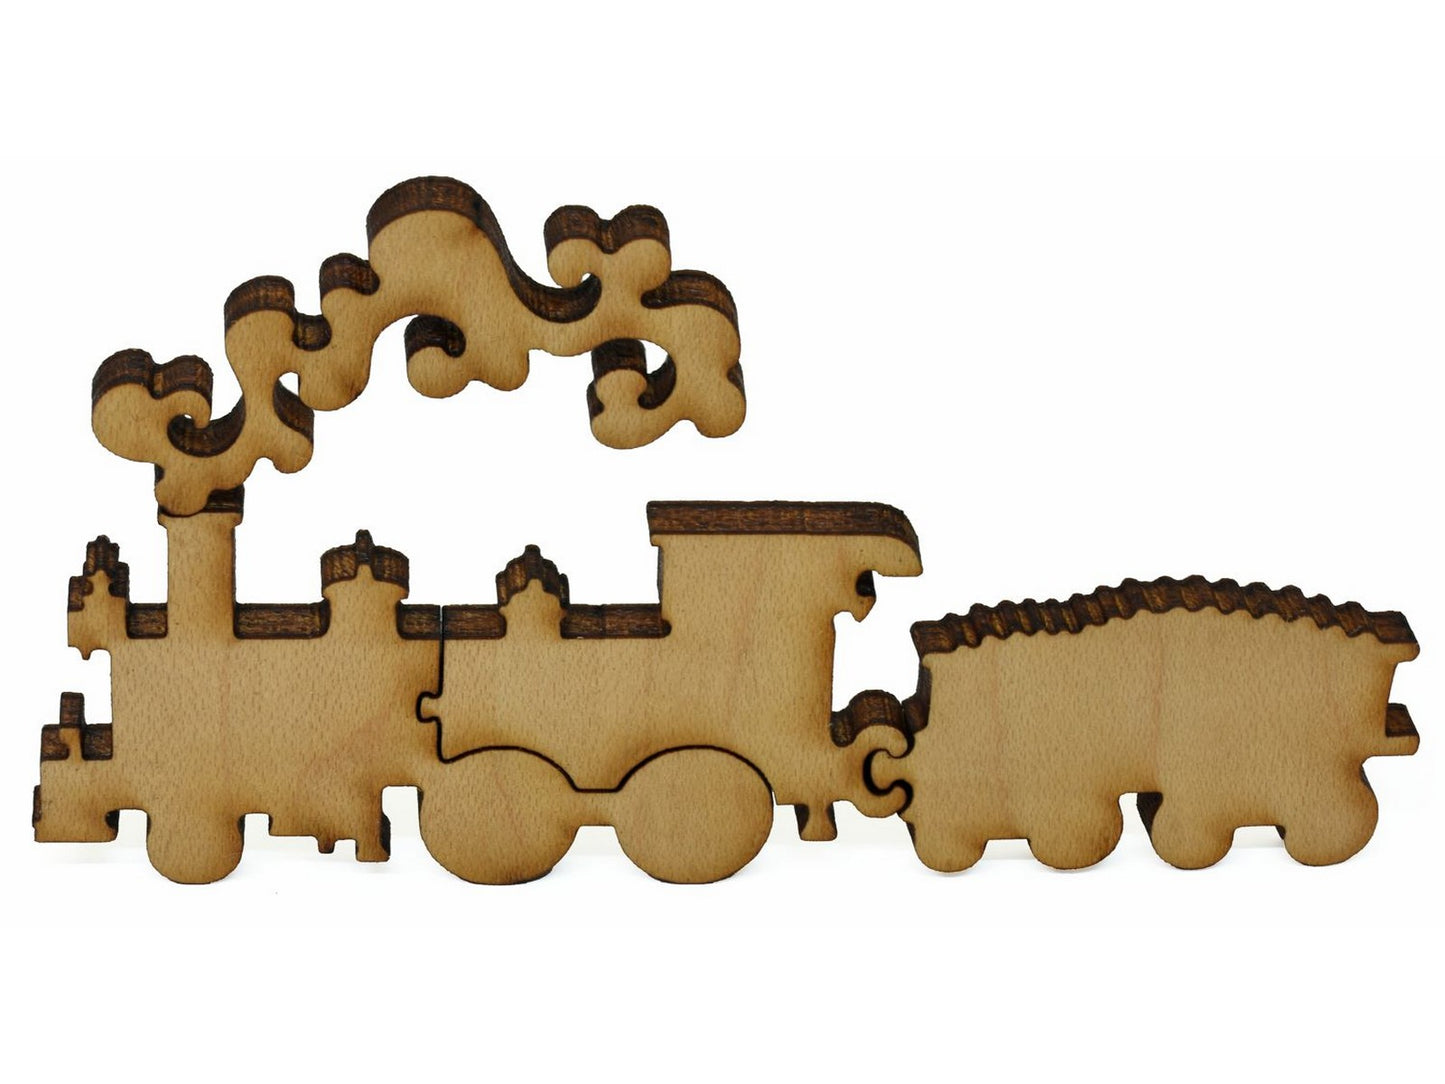 A closeup of pieces showing a train with an engine and coal car.